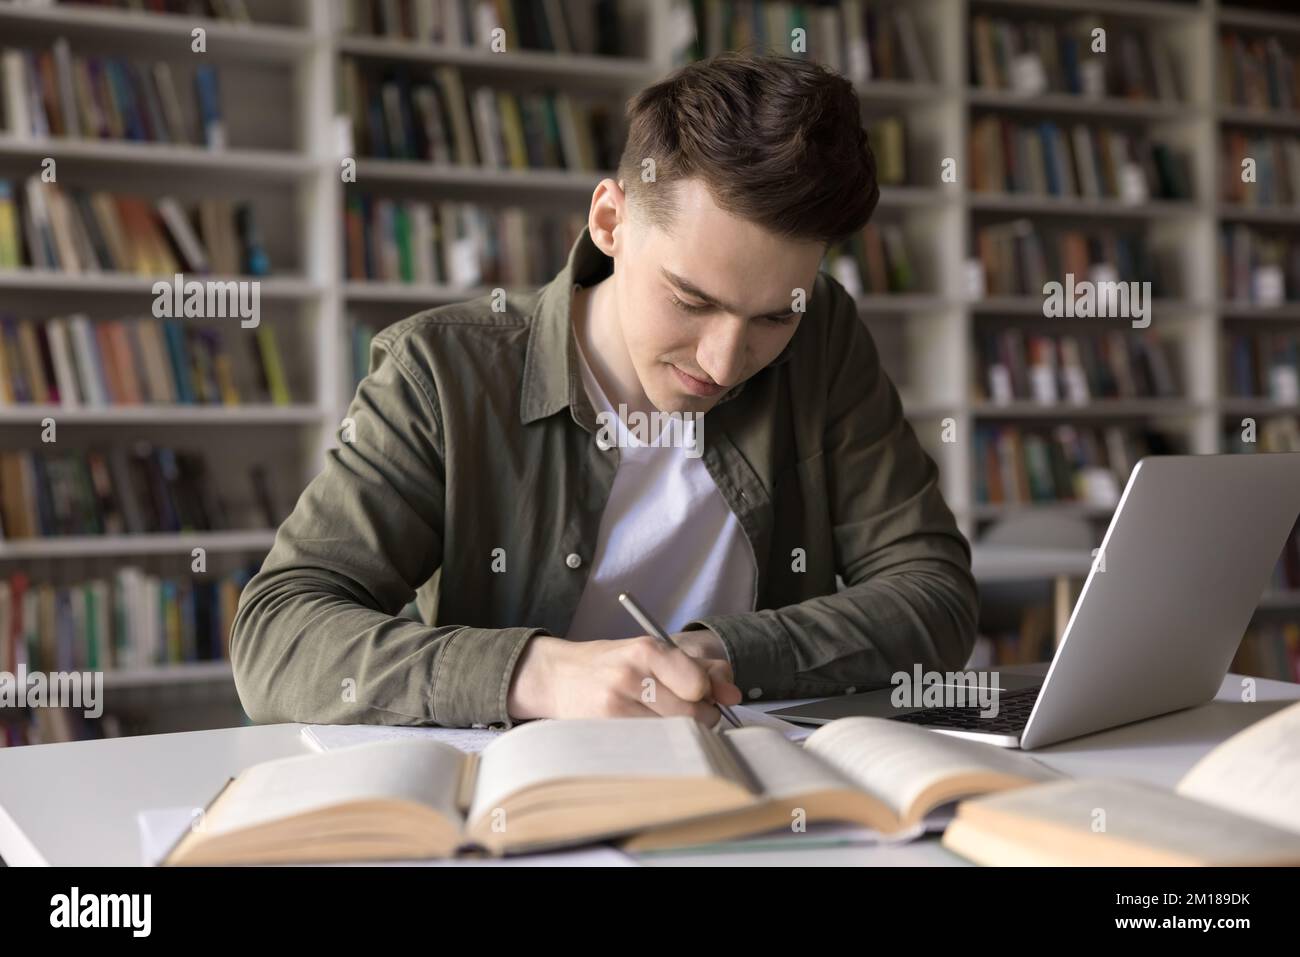 Positive busy hardworking student guy writing draft, notes Stock Photo